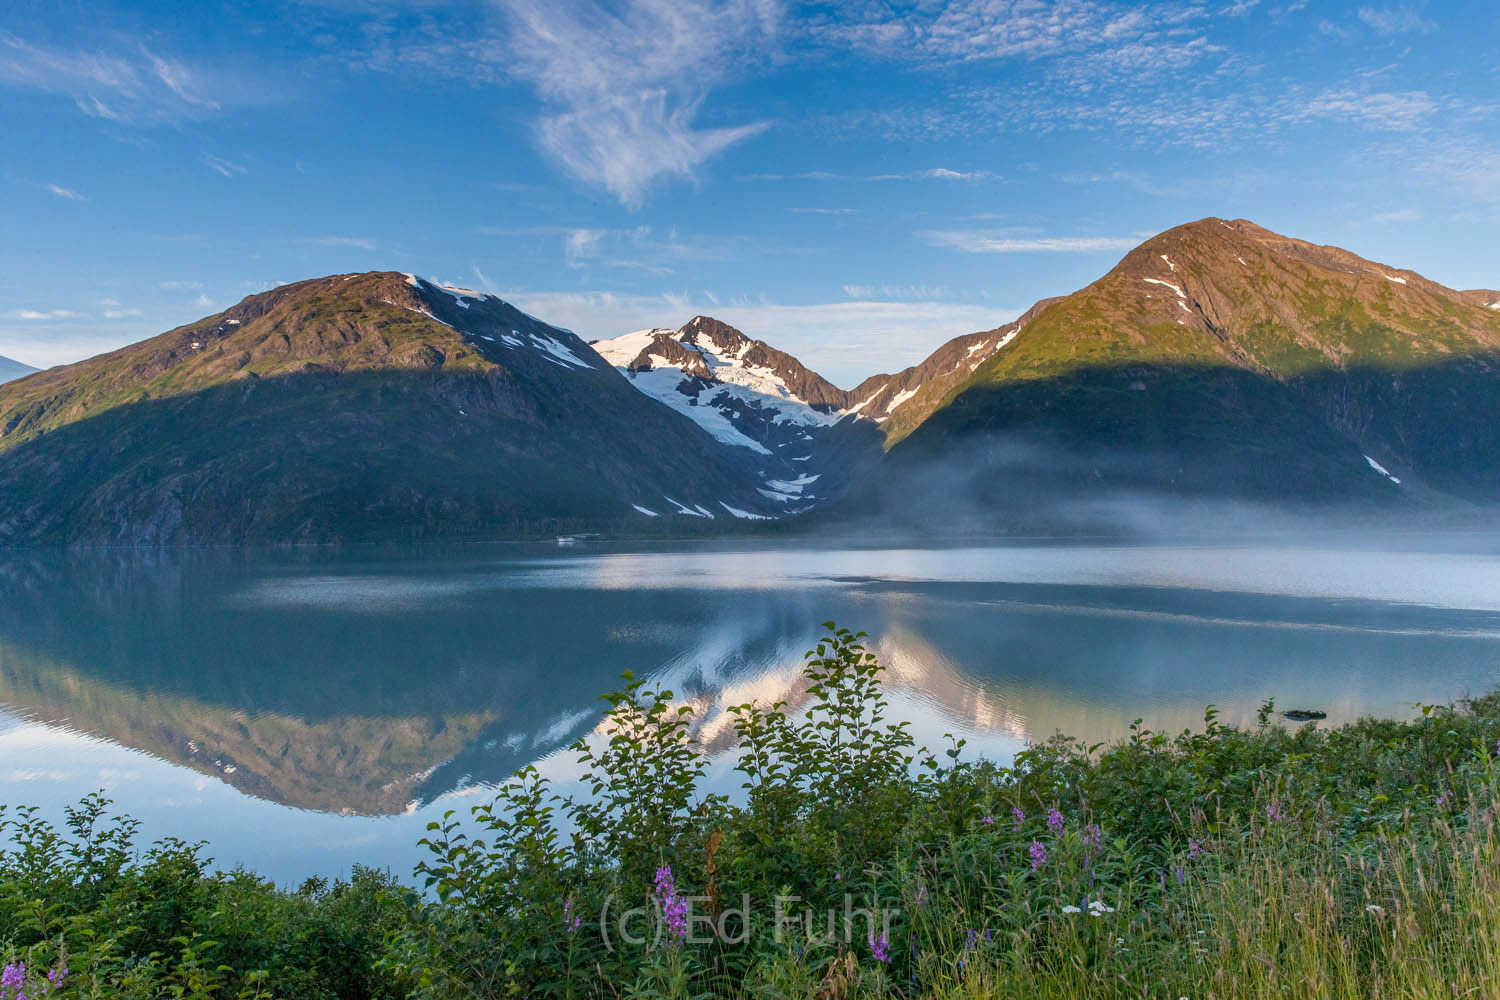 One of the remarkable places to watch sunrise as it gradually lights the peaks across Portage Lake.